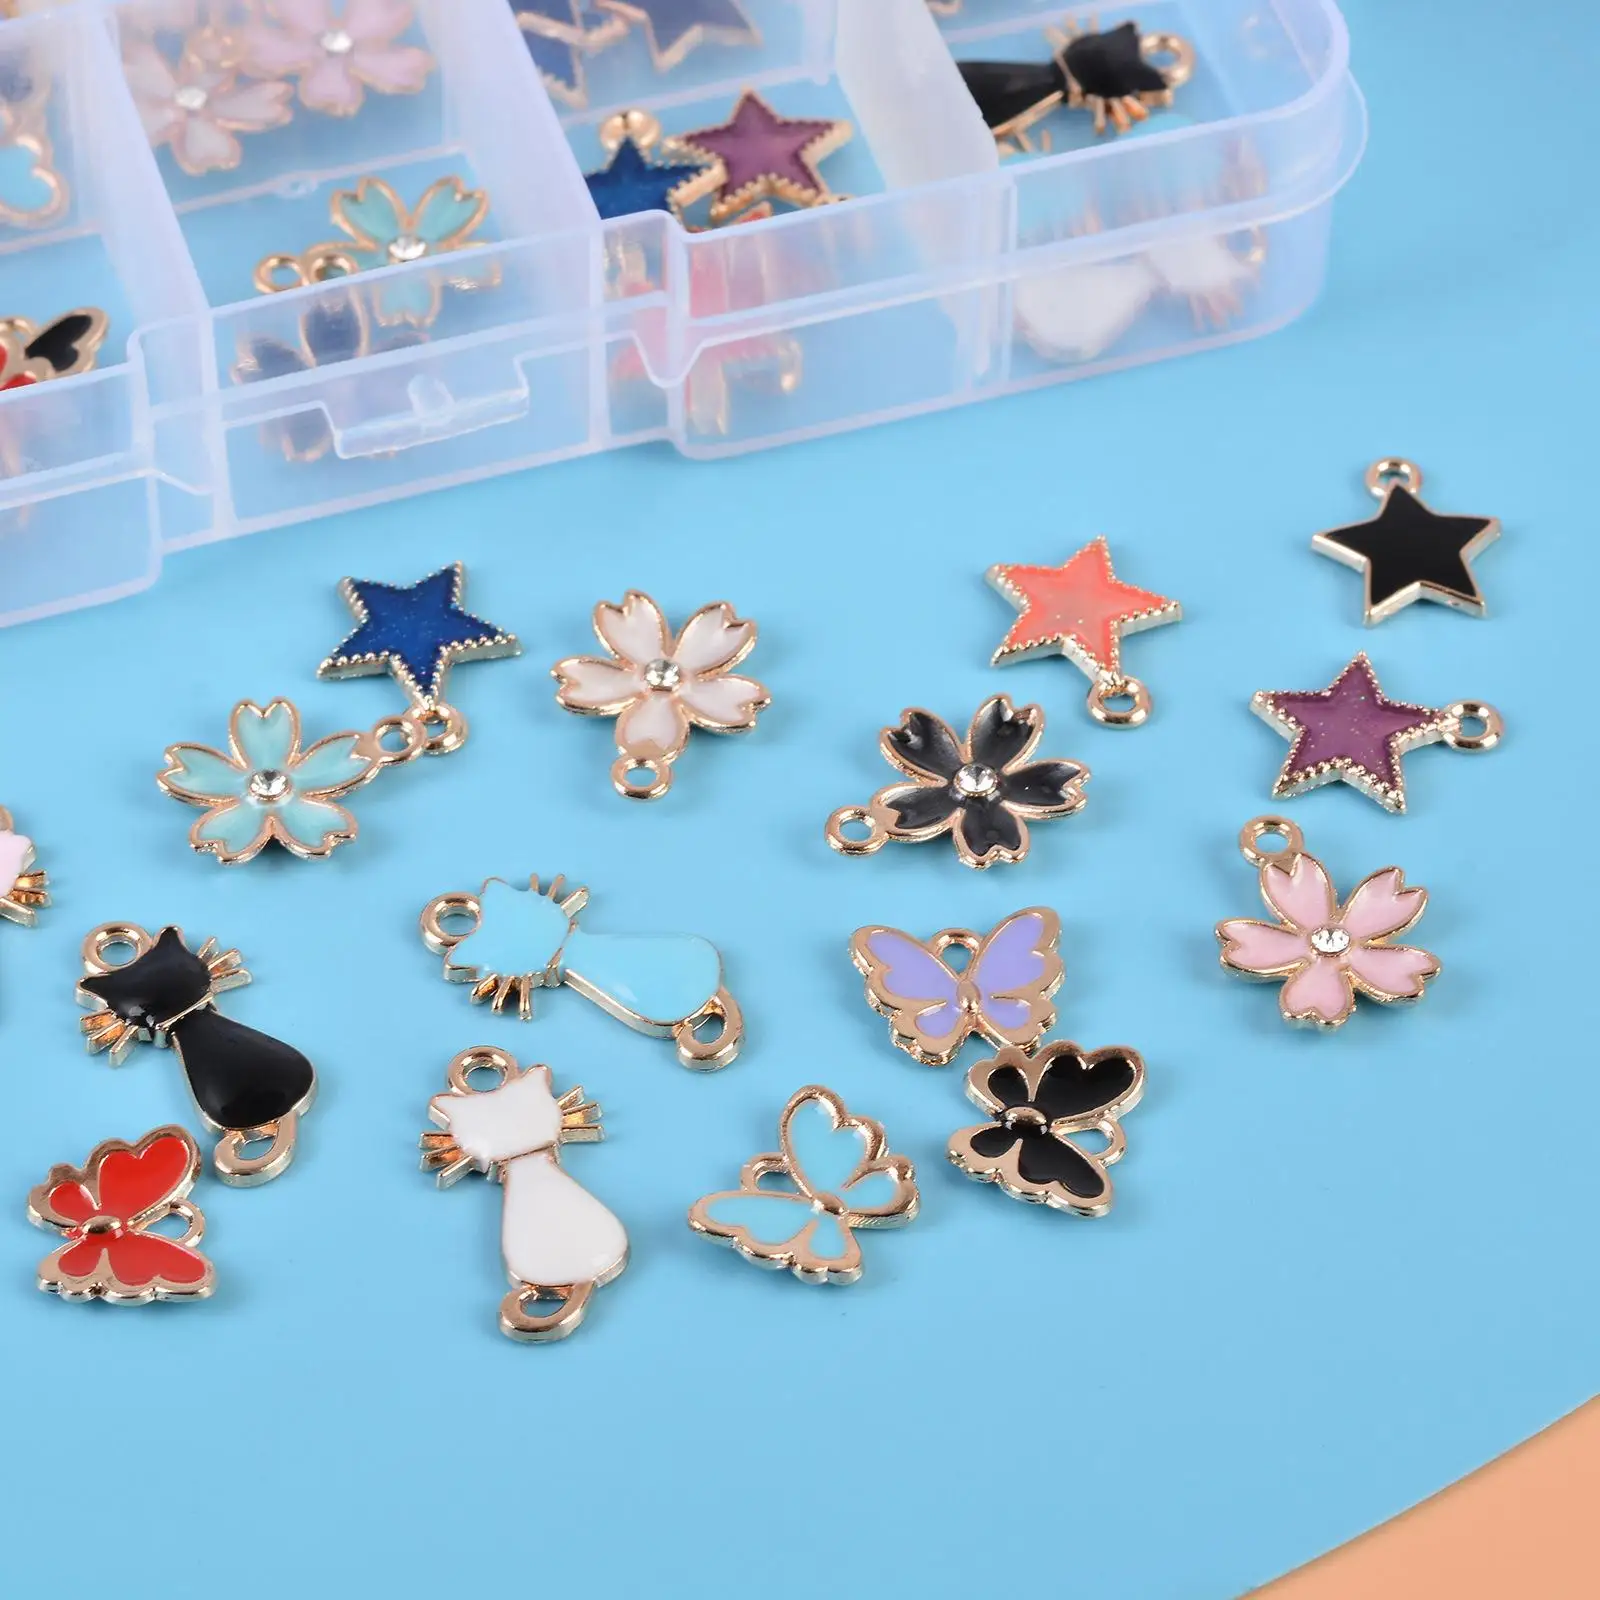 48x Assorted Enamel Charms Pendants 4 Styles Findings Dangles for Jewellery Making Bracelets Craft Gold Plated Mixed